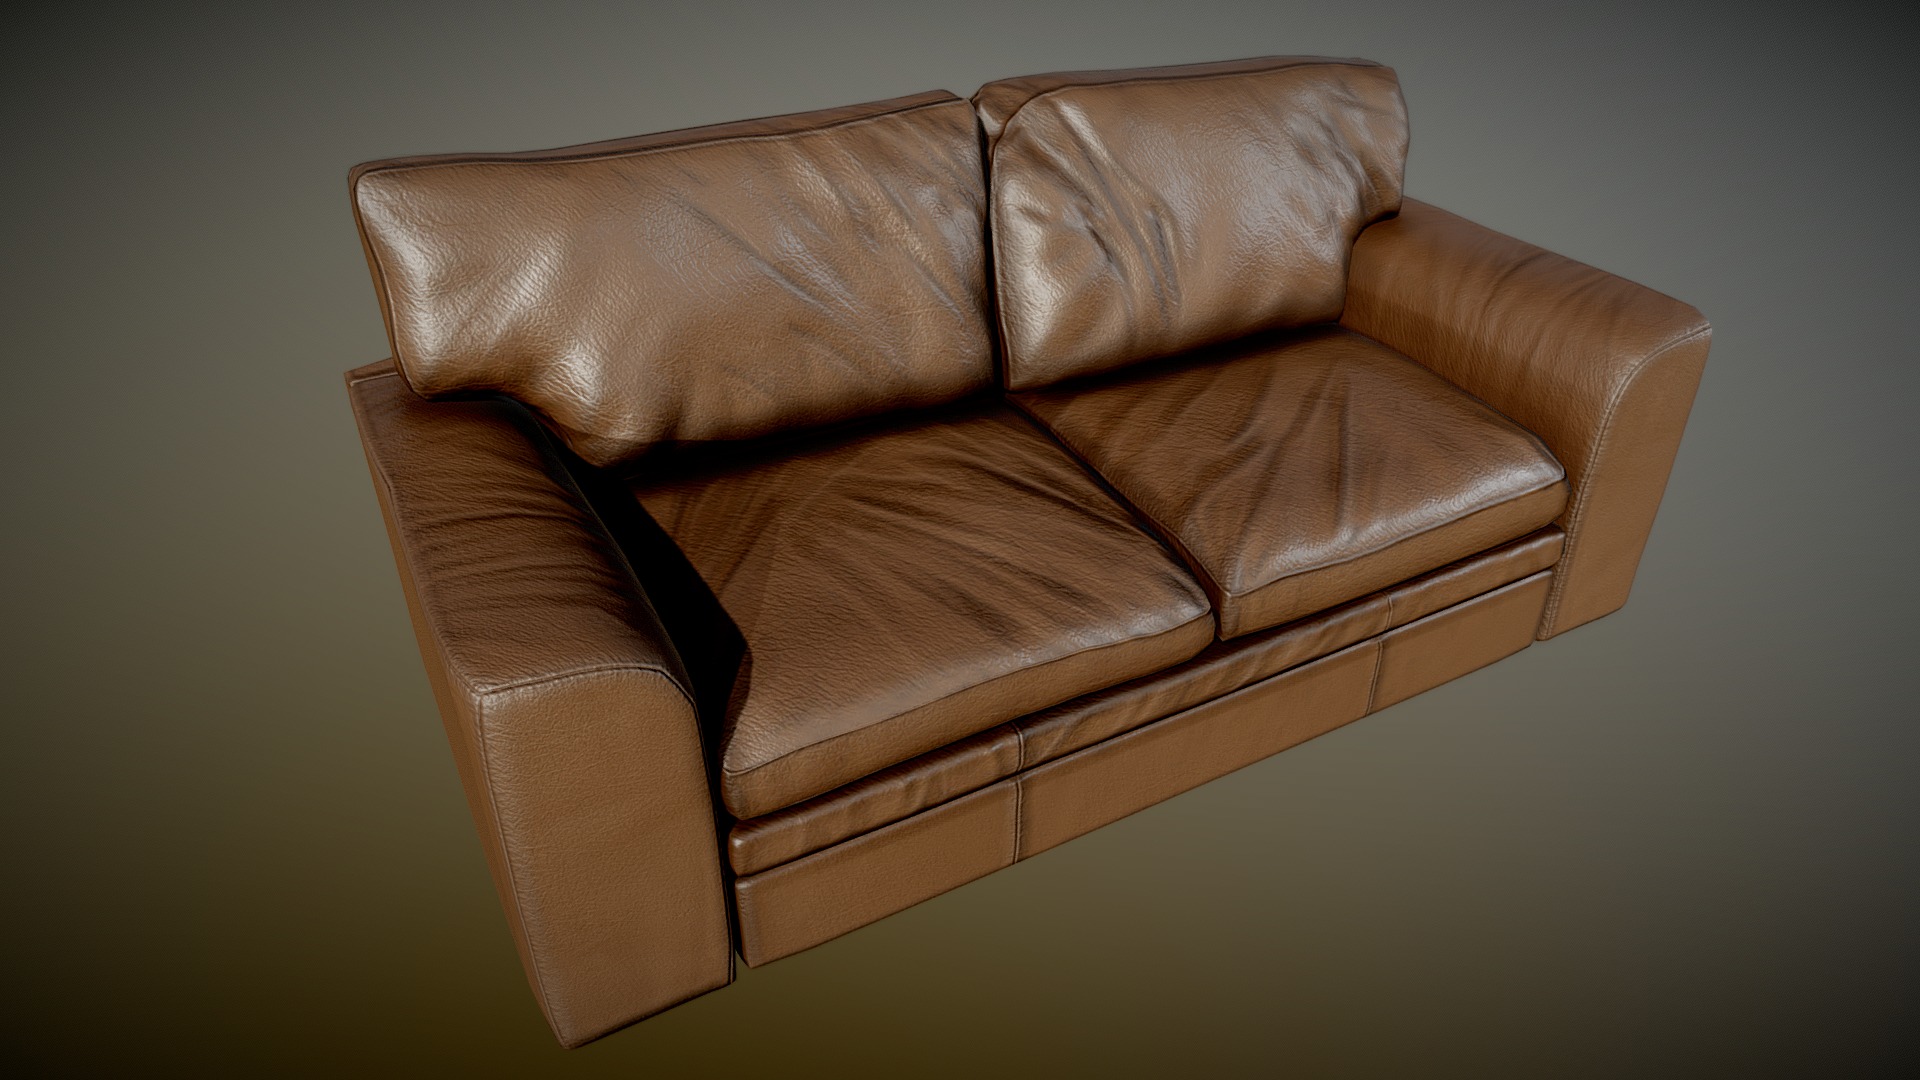 3D model Old Clean Leather Couch Brown – PBR - This is a 3D model of the Old Clean Leather Couch Brown - PBR. The 3D model is about a brown leather couch.